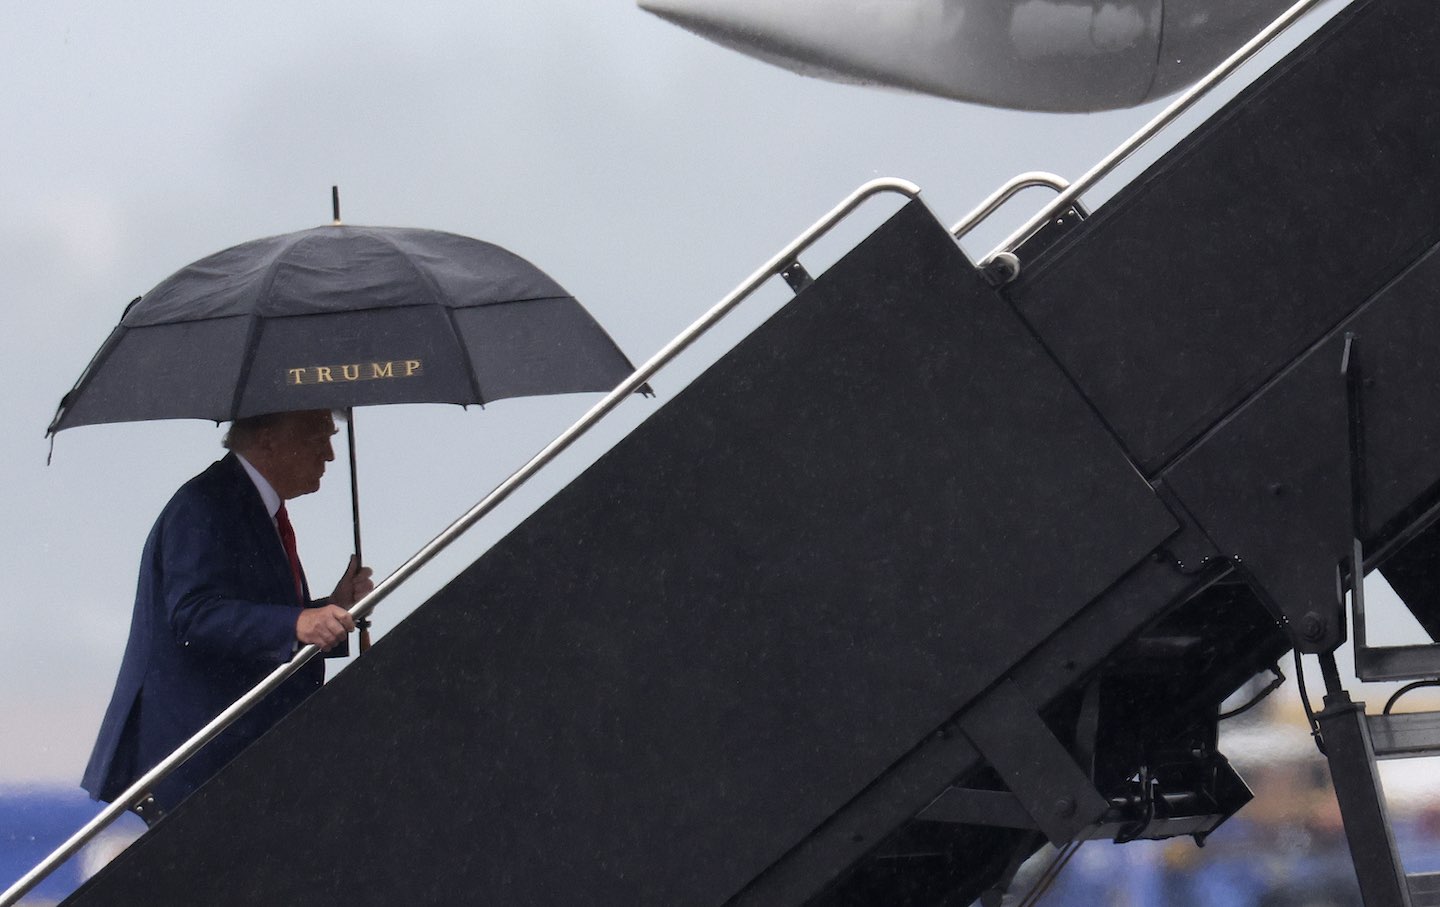 Donald Trump boards his plane at Reagan National Airport following his arraignment in Washington, D.C. federal court on August 3, 2023, in Arlington, Va.